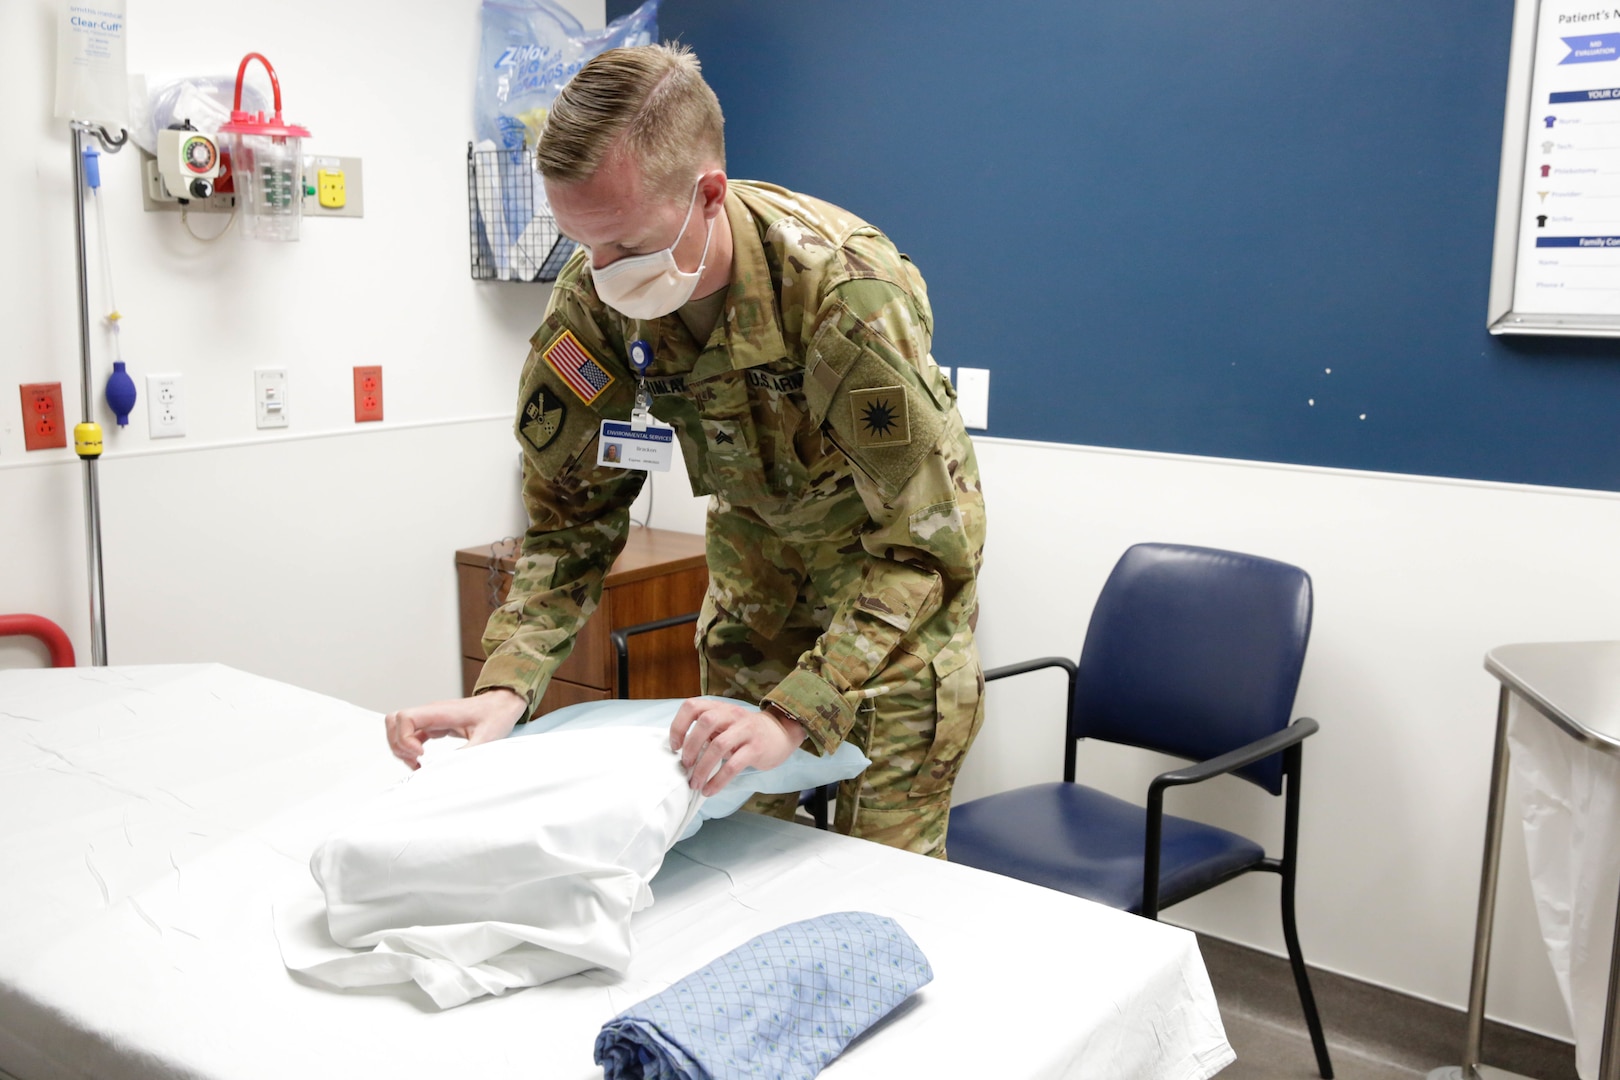 Utah National Guard Sgt. Bracken McKinlay changes sheets and cleans a room after a patient is moved out of the emergency room at St. George Regional Hospital. For the first time since the beginning of the pandemic, Utah National Guard members of the COVID-19 Joint Task Force are providing direct hospital support in non-medical roles.